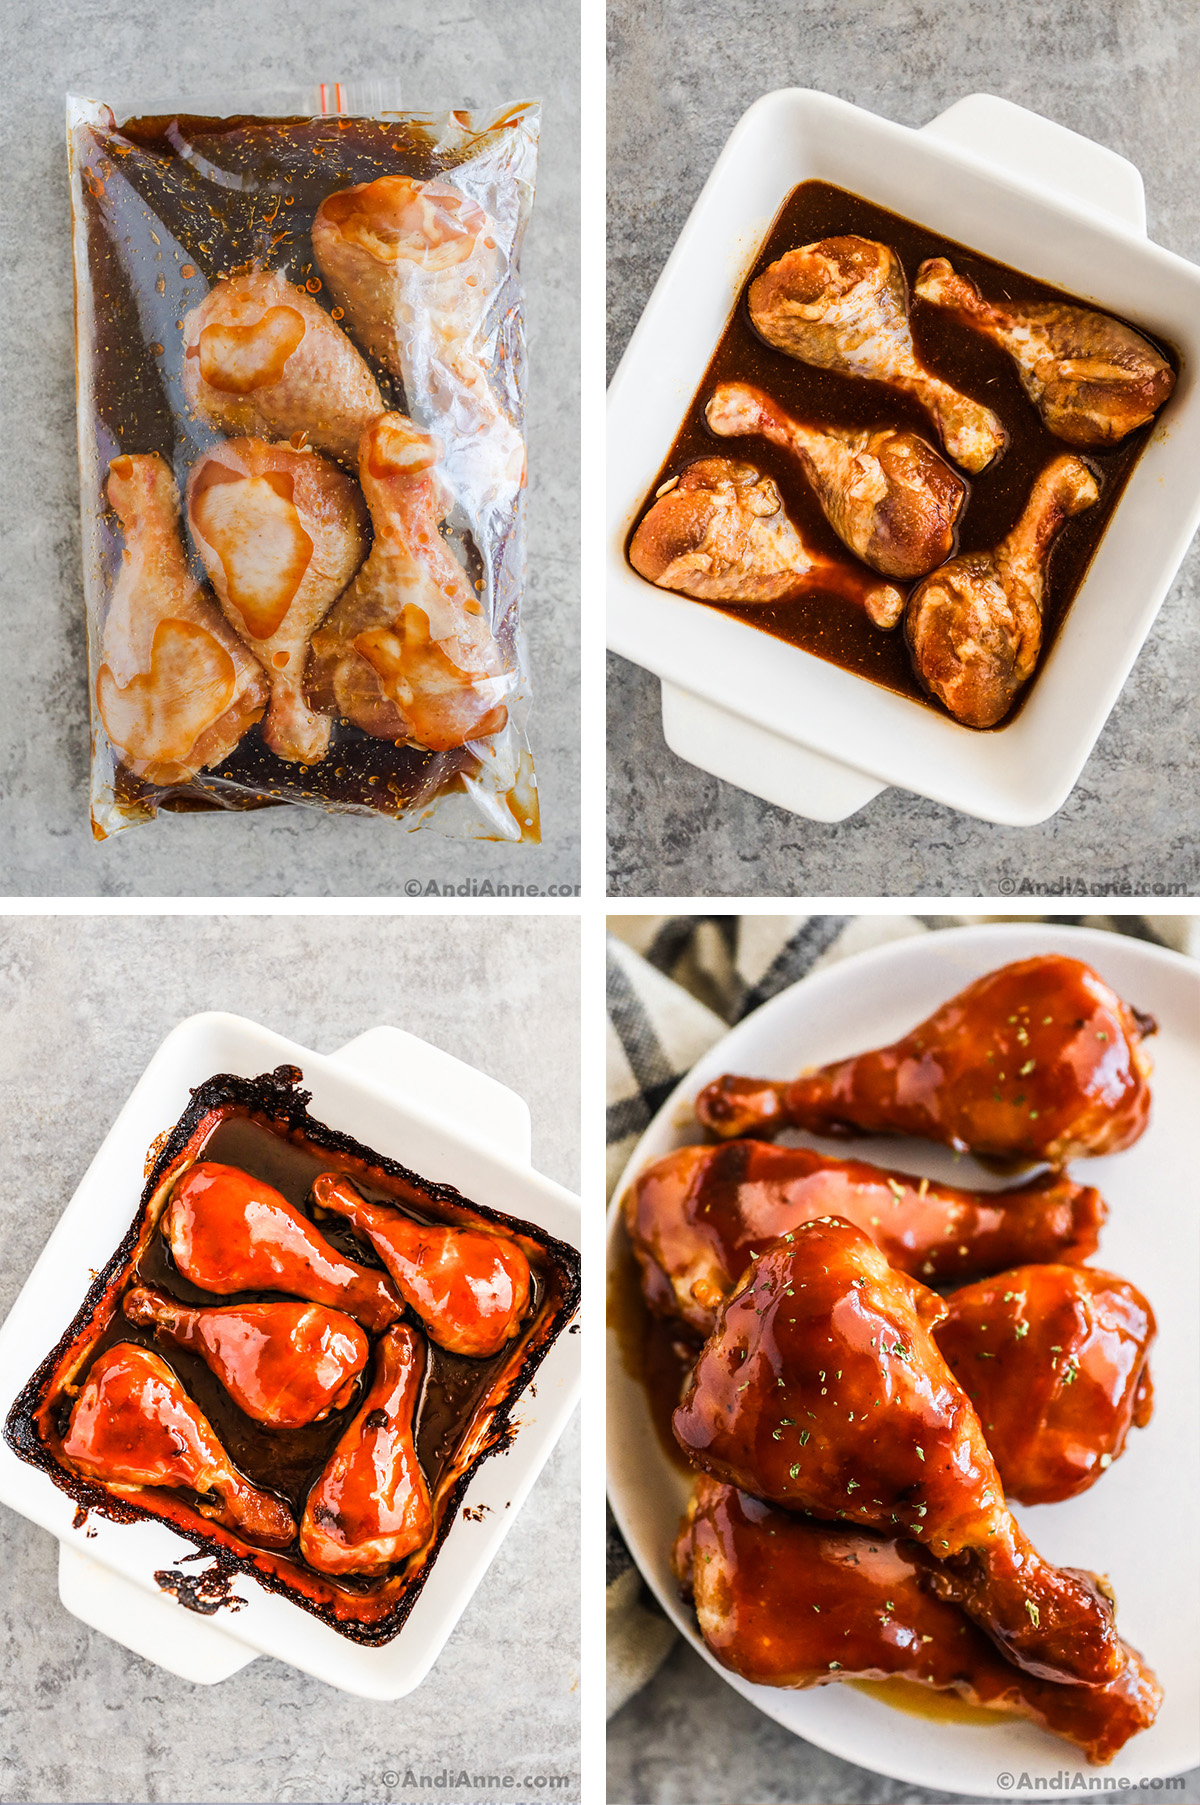 Four images, first is marinated chicken legs in a bag, second is chicken legs with sauce in a baking dish, third is baked honey glazed chicken in baking dish, fourth is baked honey glazed chicken legs on a plate. 